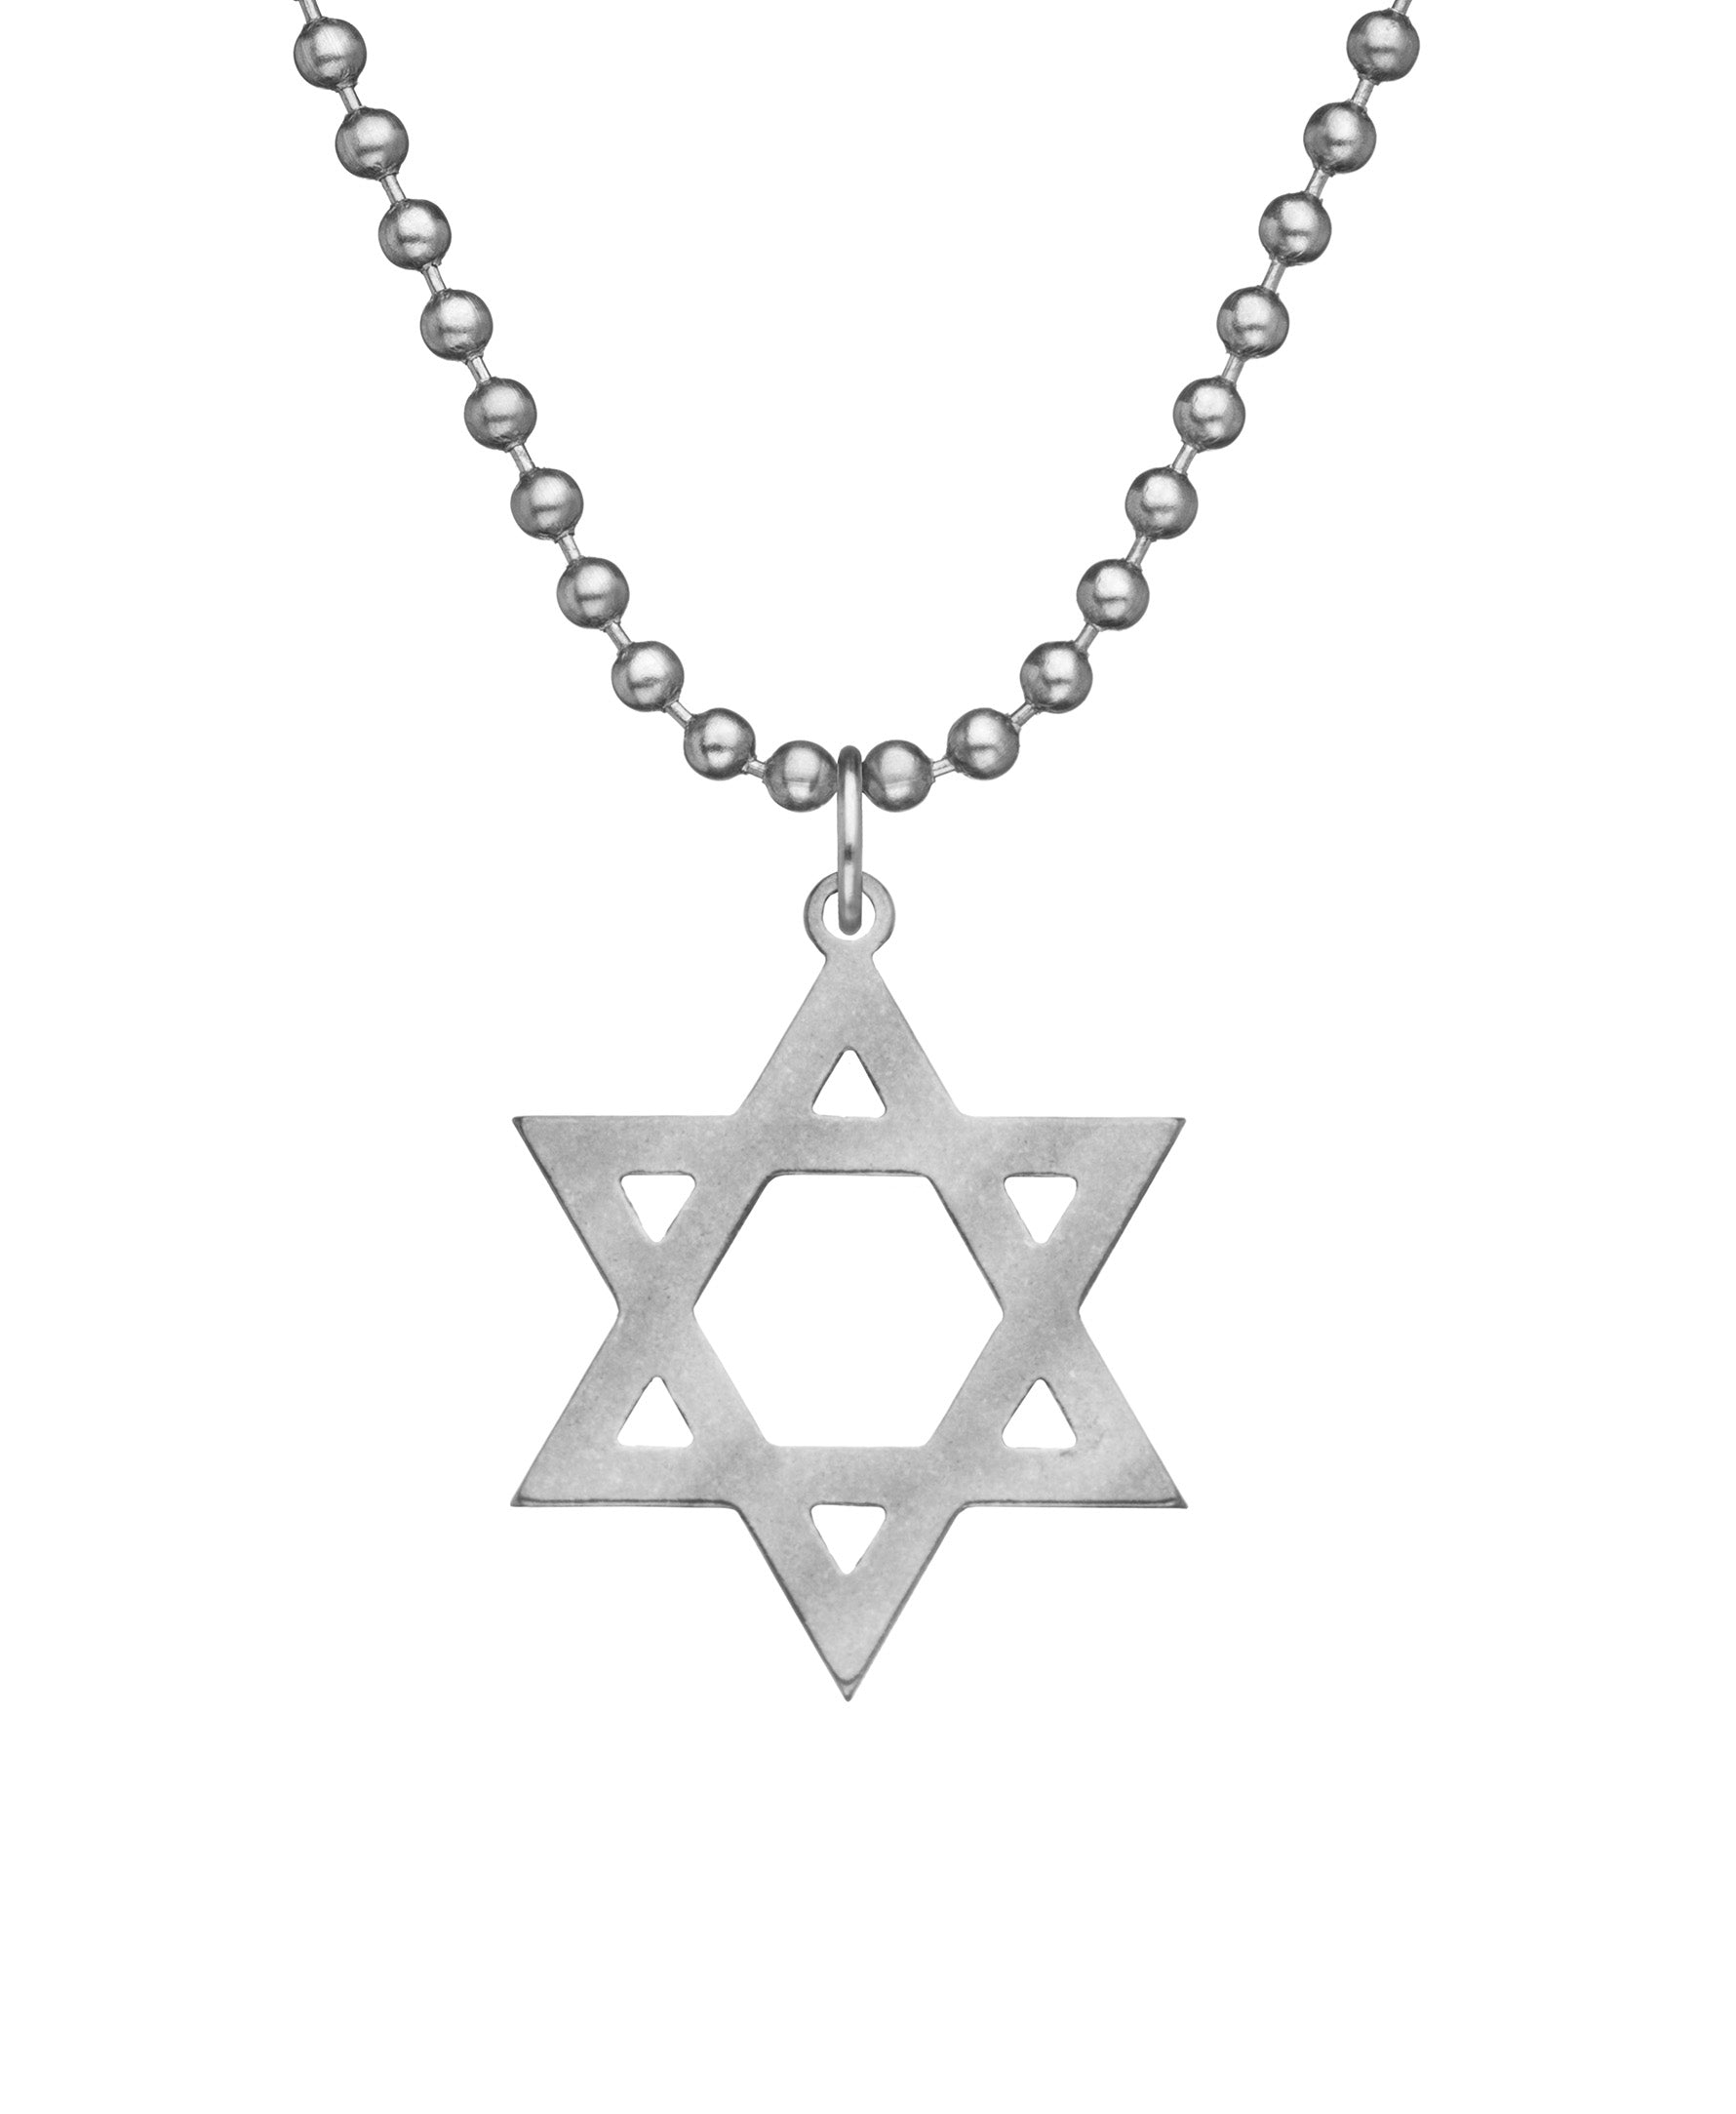 Genuine U.S. Military Issue Star of David Necklace with Dog Tag Chain